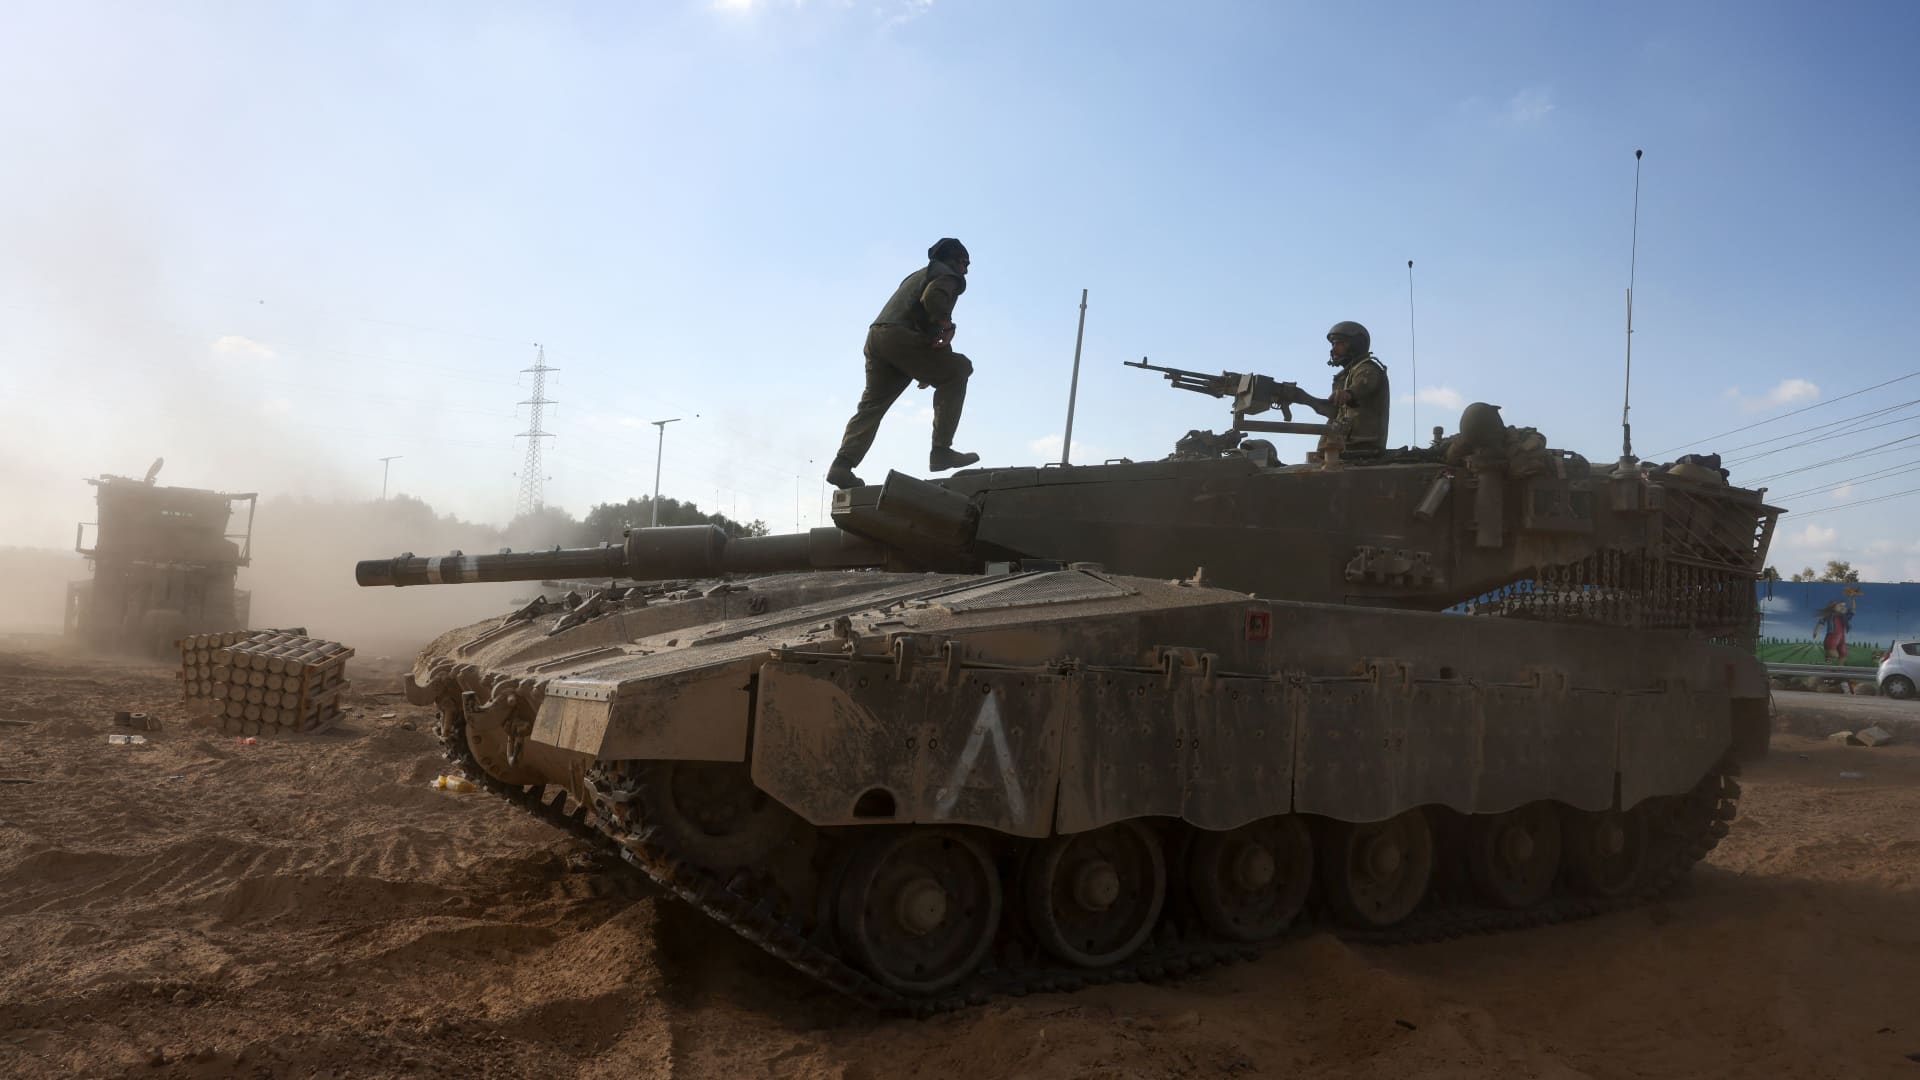 Israel’s ground offensive in Gaza may not be a ‘full invasion,' says ex-U.S. ambassador